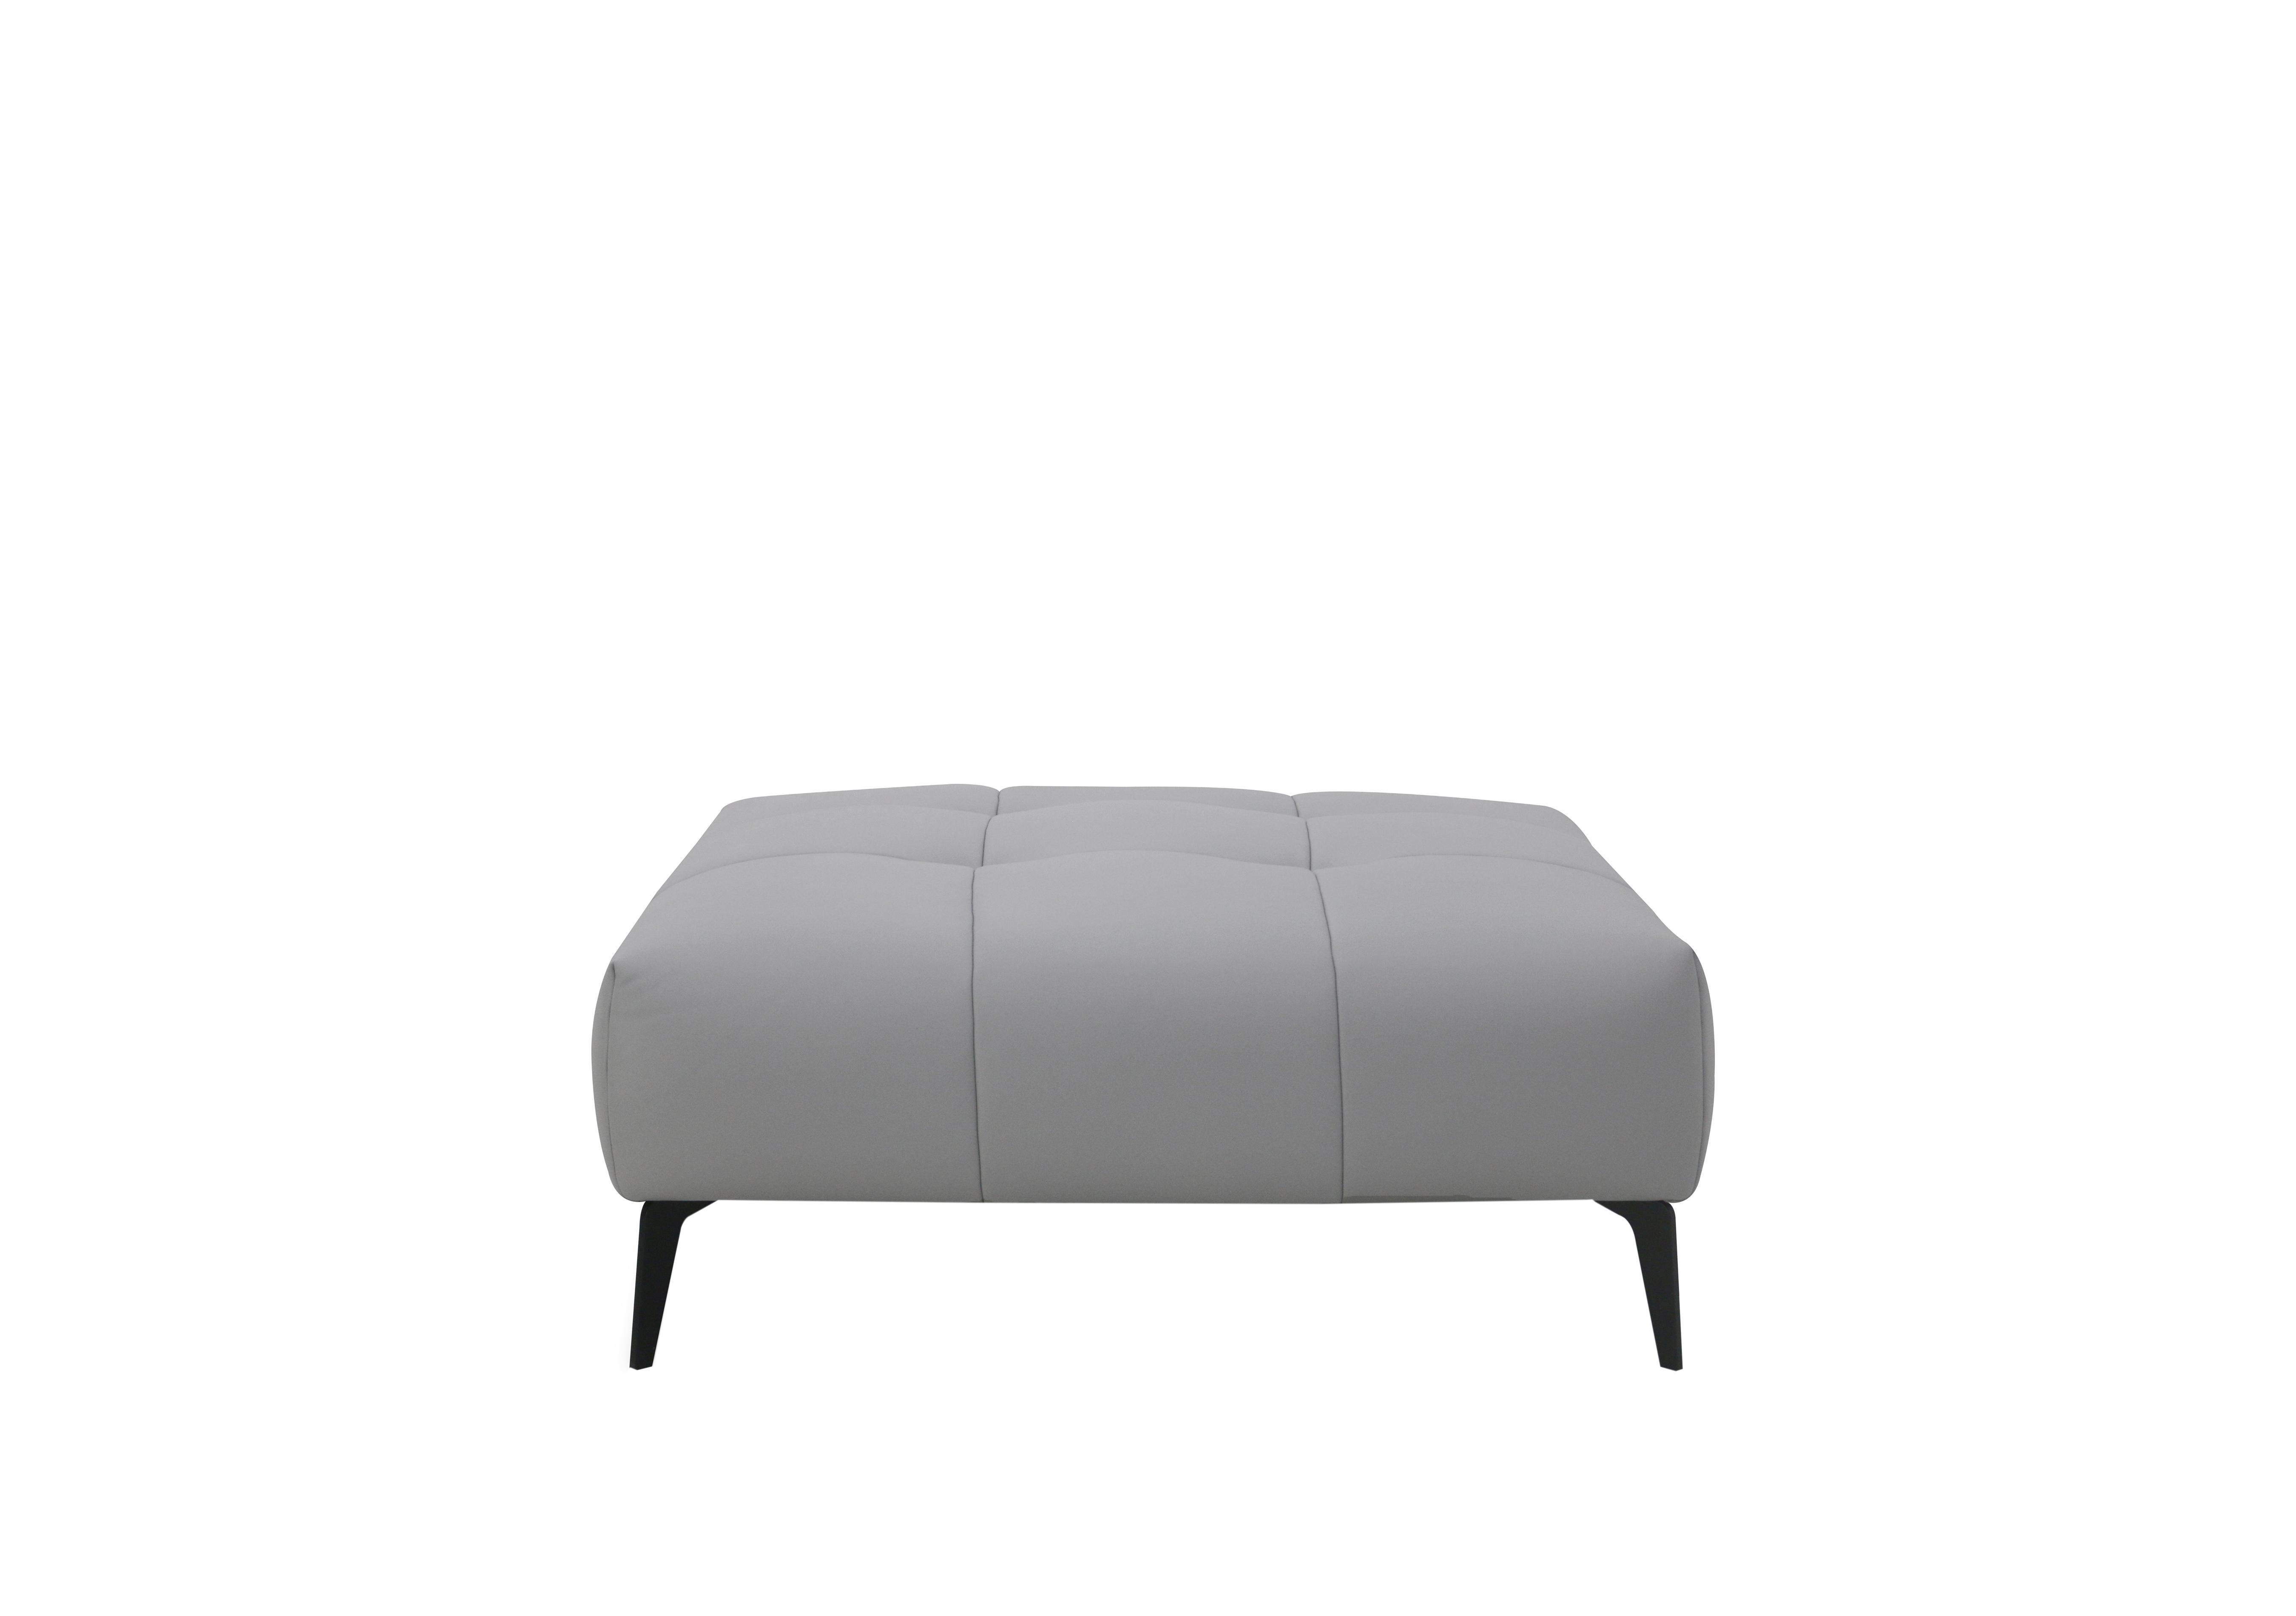 Lawson Leather Footstool in Np-516e Light Grey on Furniture Village